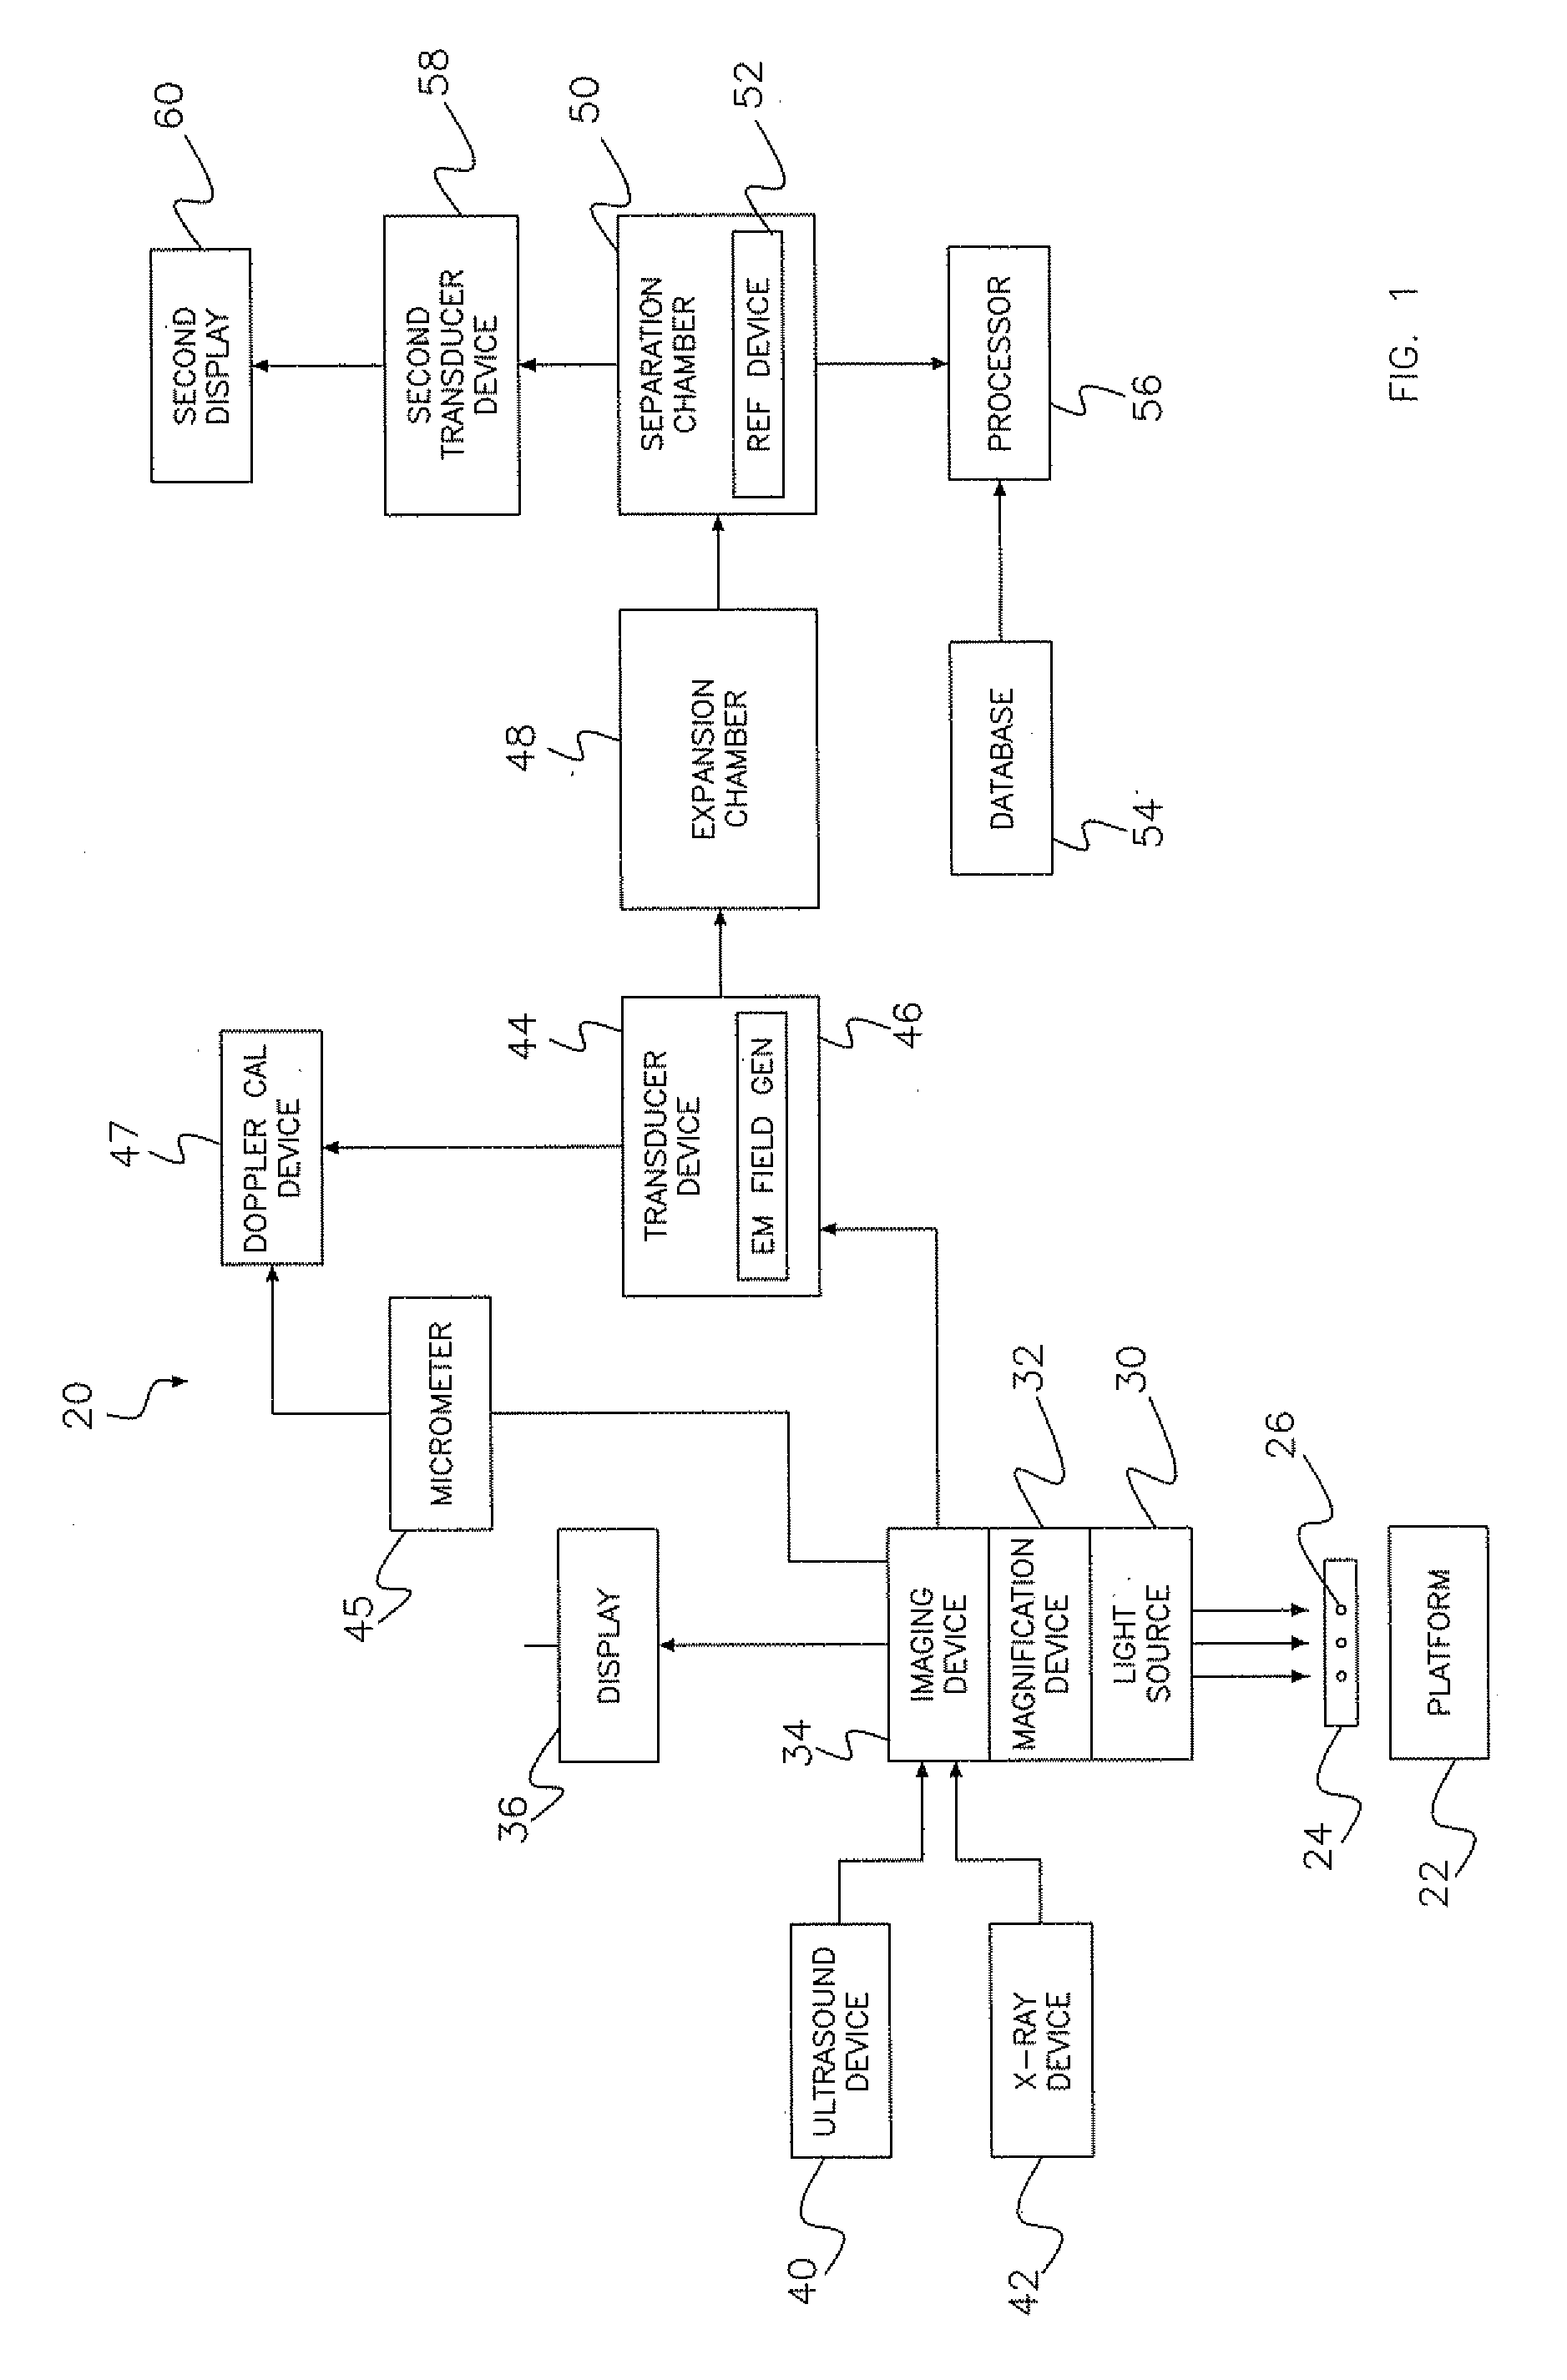 Virtual non-invasive blood analysis device workstation and associated methods